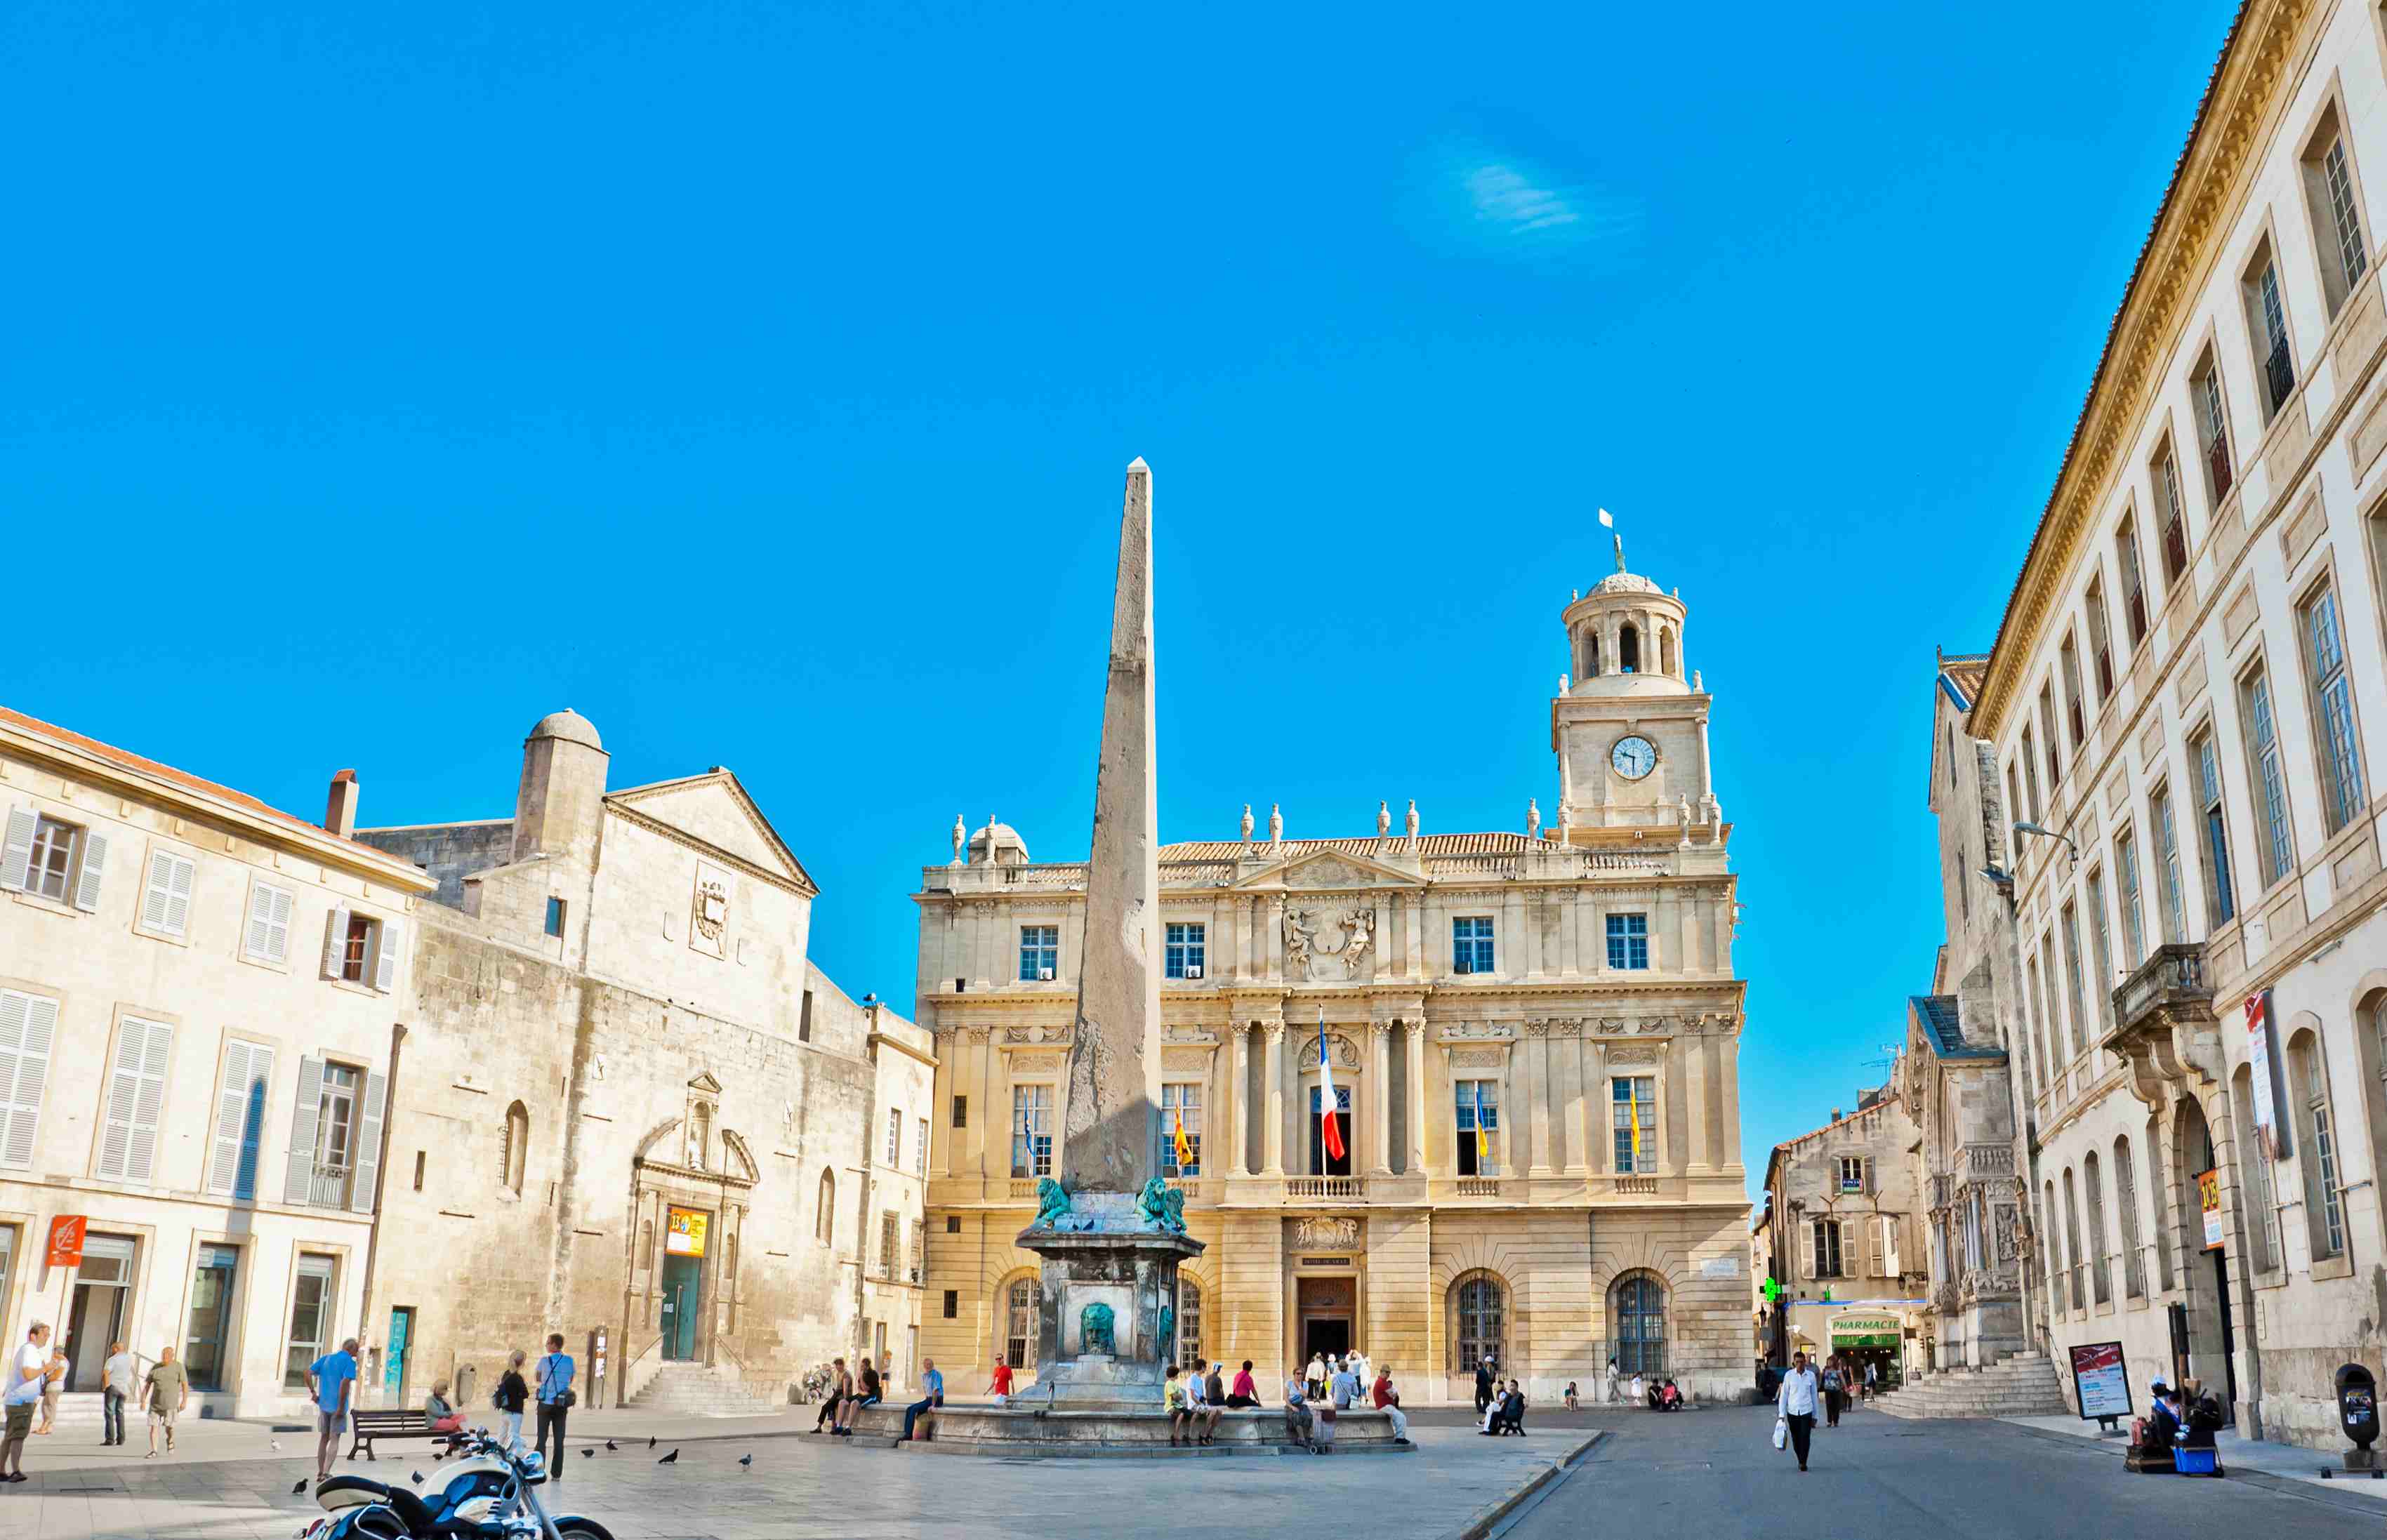 Town of Arles known as the 'Little Rome' of Provence (Image: Alexander Demyanenko/Courtesy of CroisiEurope)